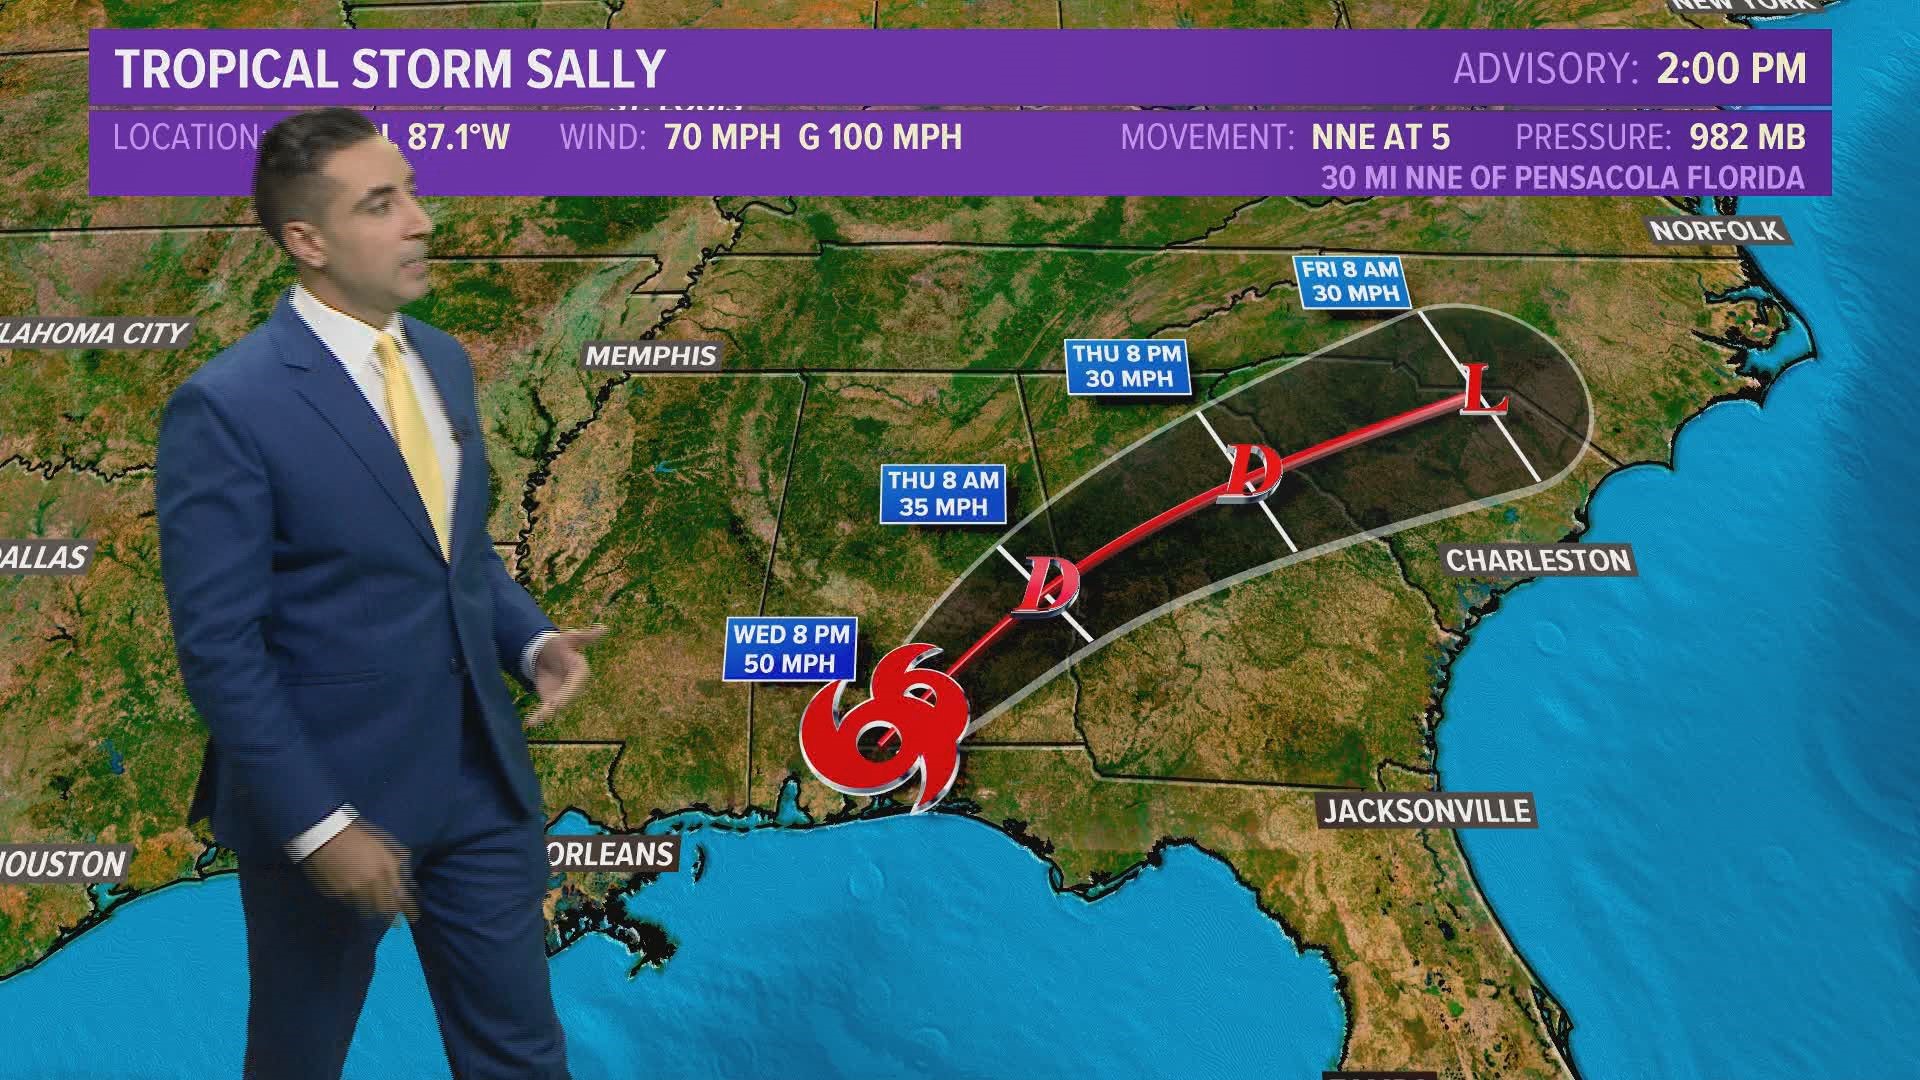 13News Now Meteorologist Tim Pandajis talks about Hurricane Sally's landfall along the Gulf Coast and its continuing impacts.